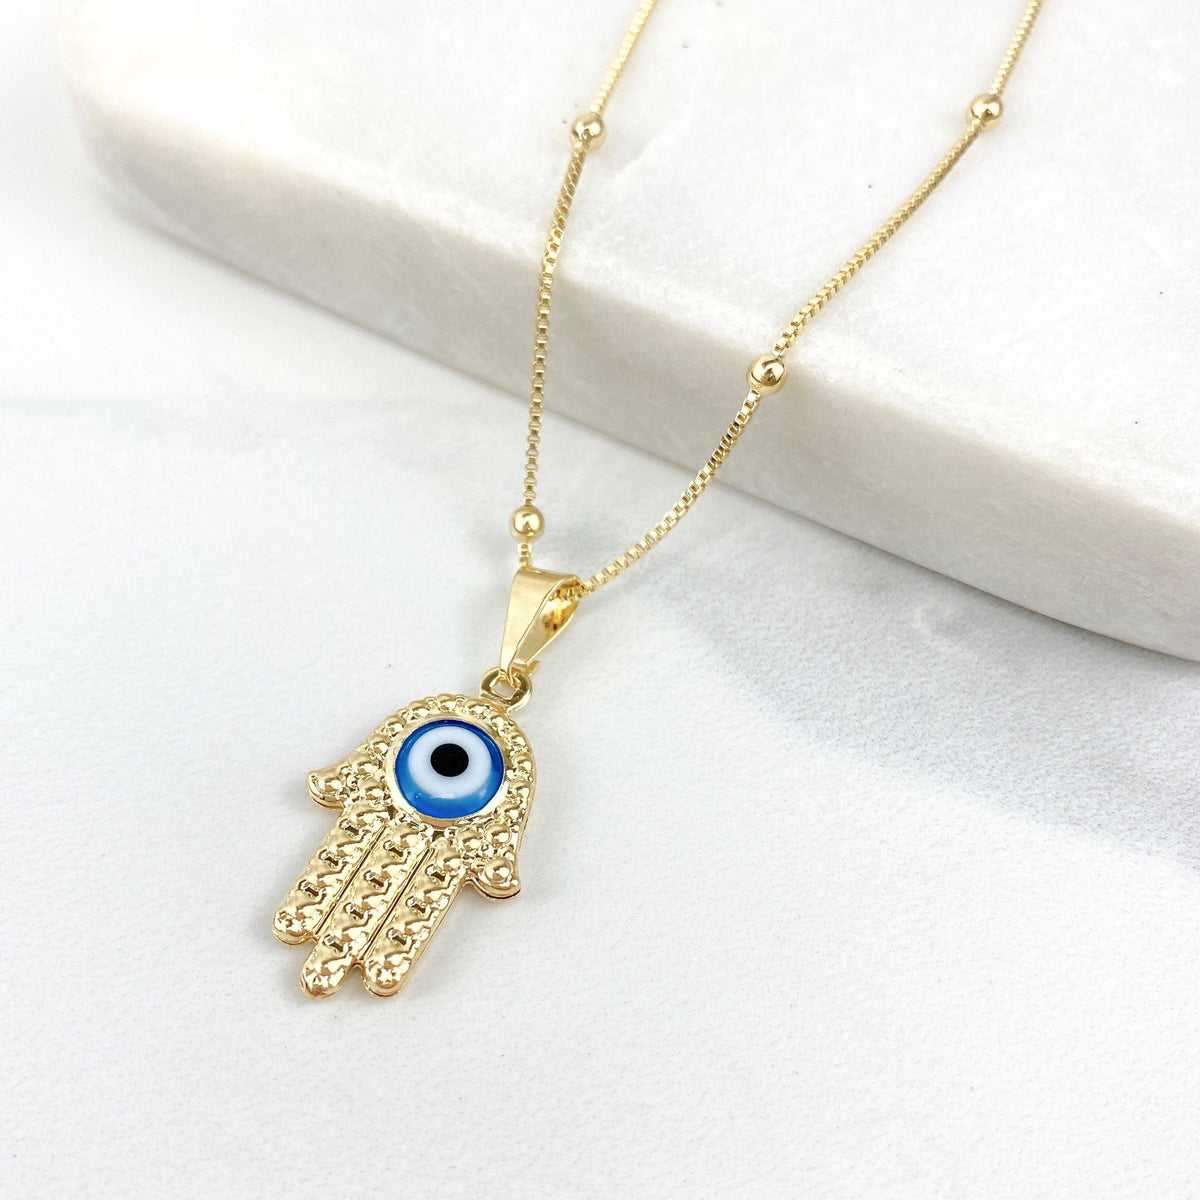 Hamsa Hand Pendant Necklace in 9ct Yellow Gold, Pendant Only - No Chain